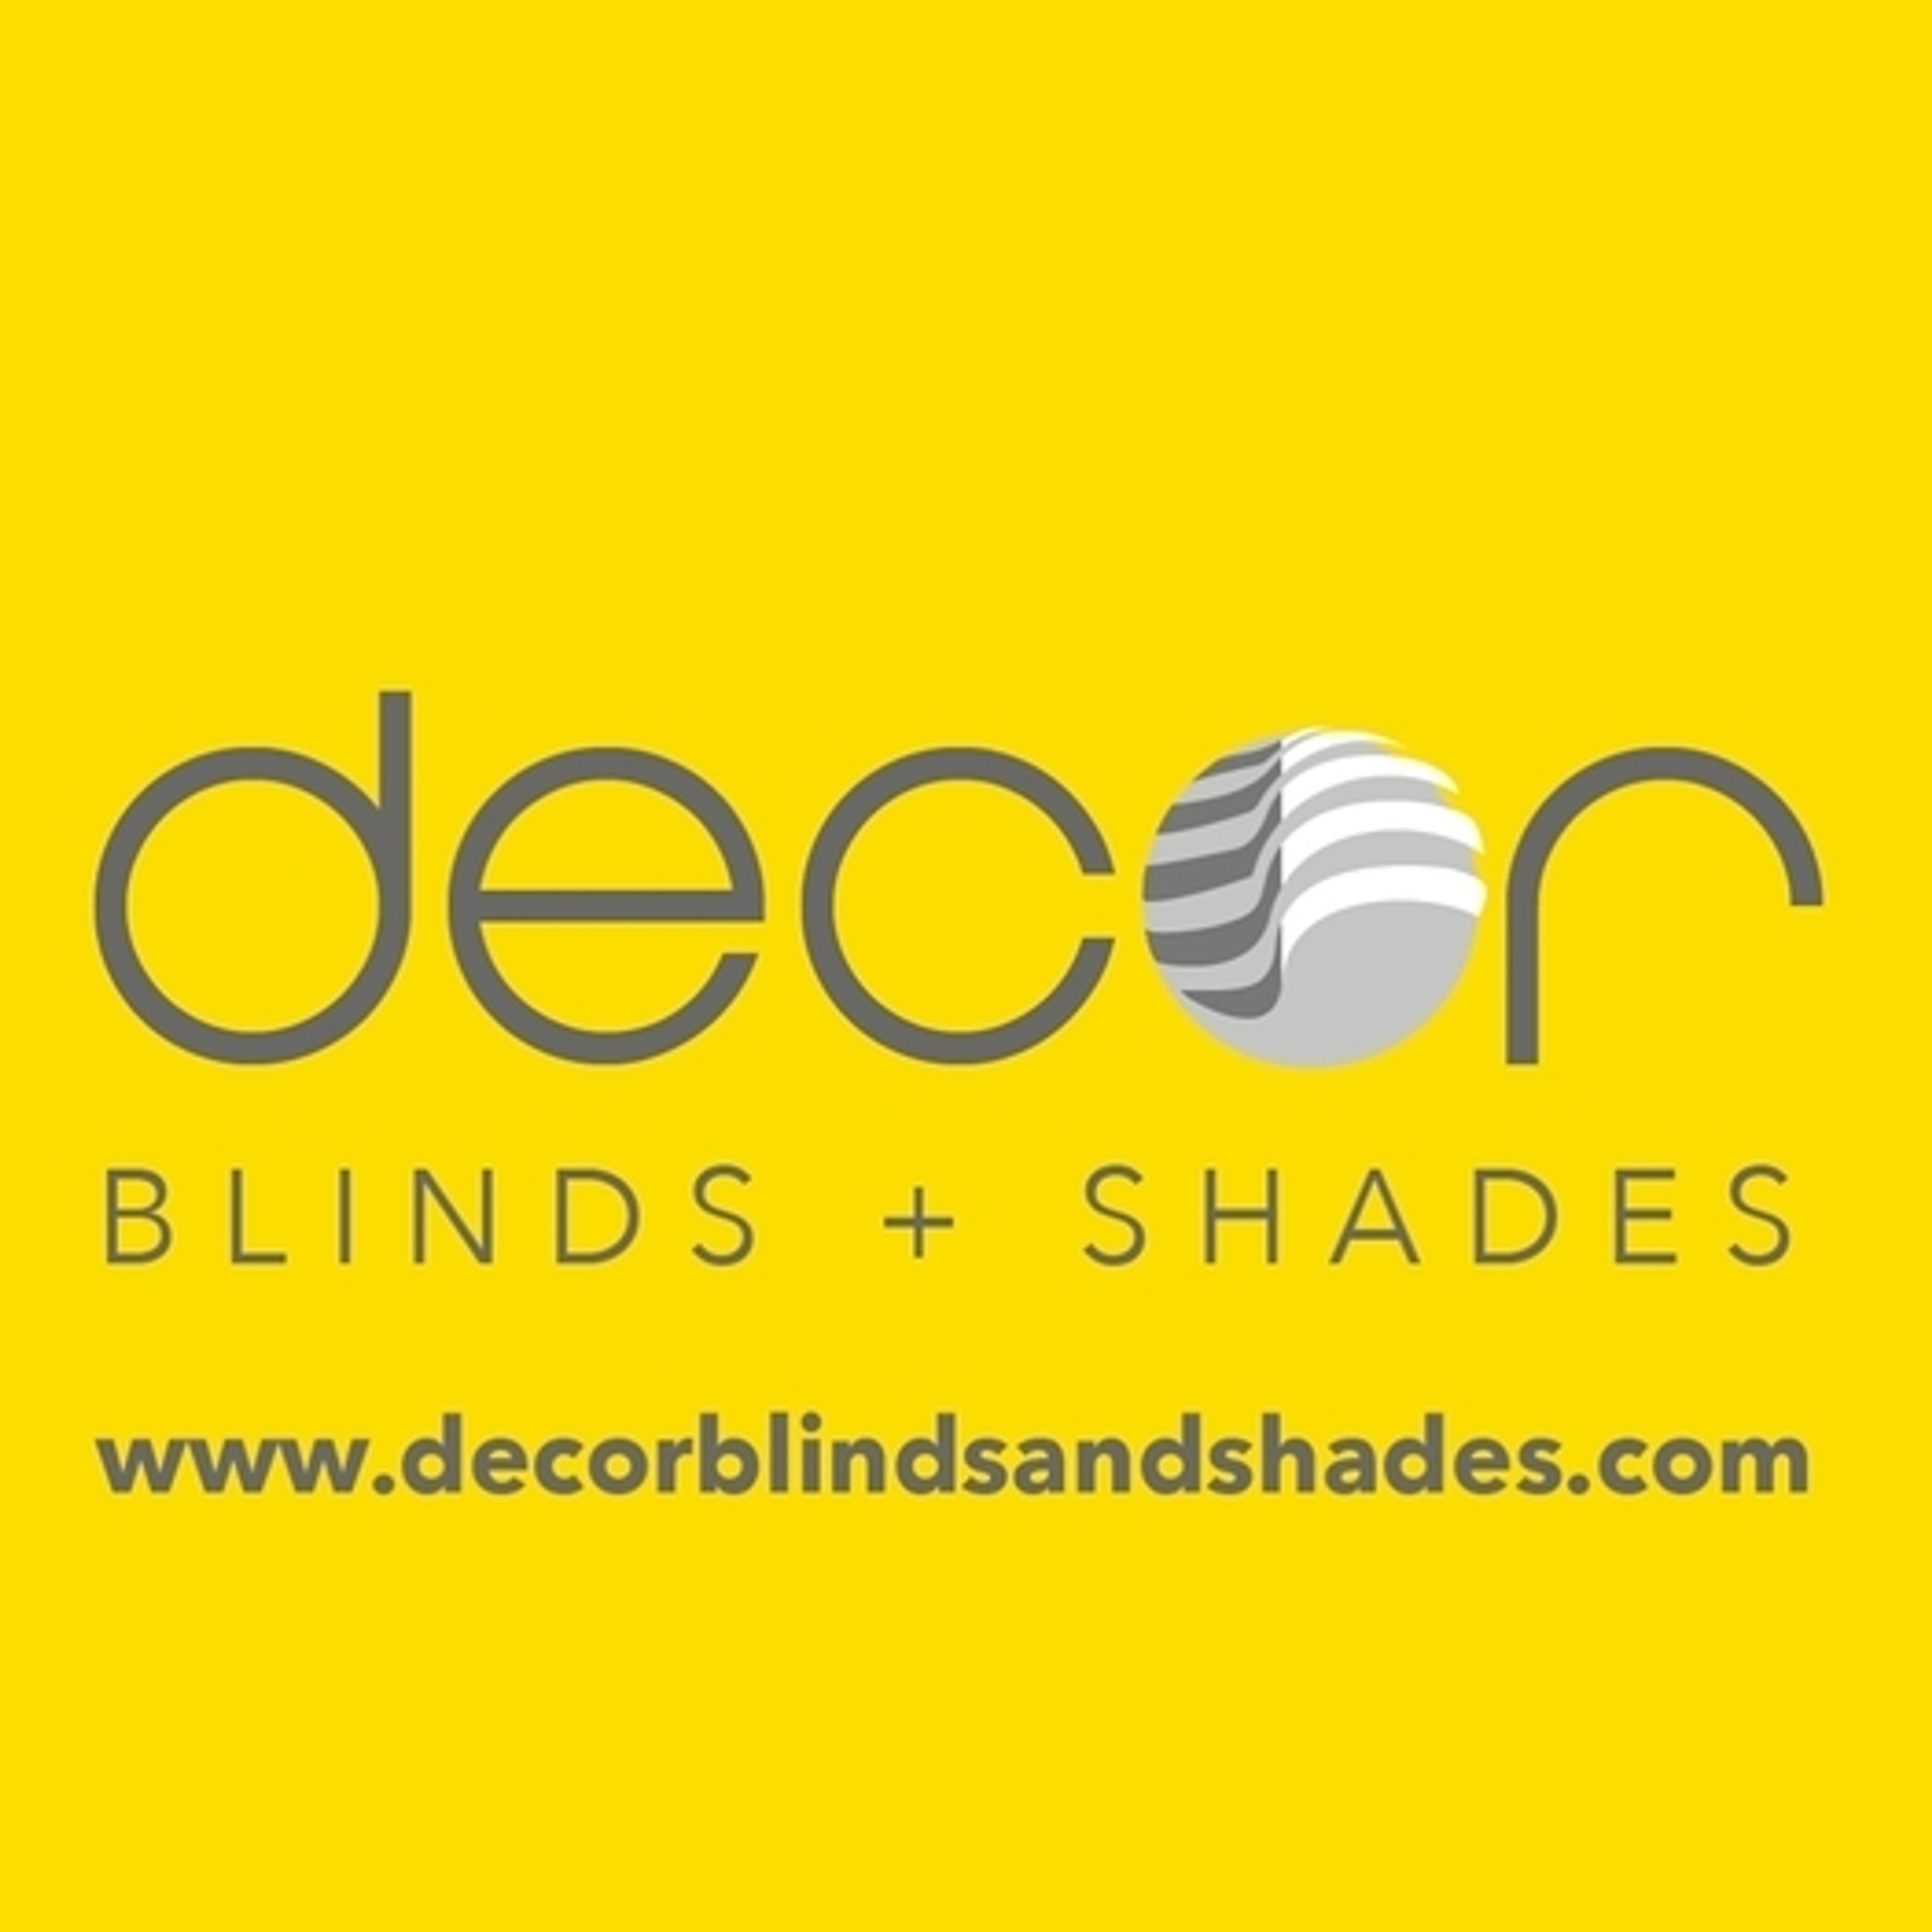 Decor Blinds and Shades